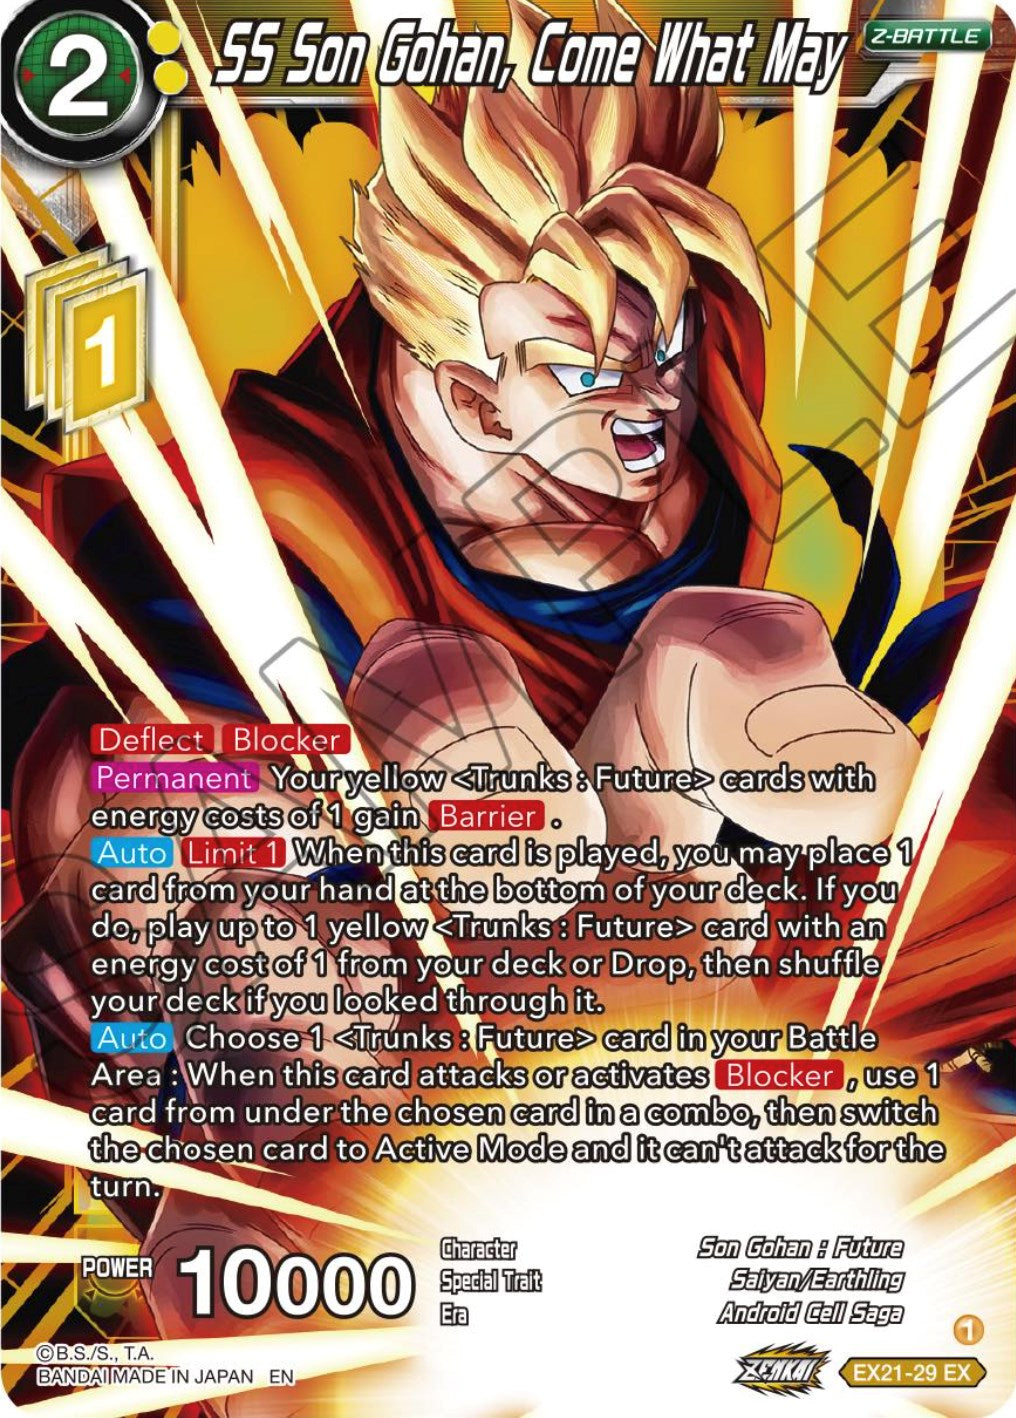 SS Son Gohan, Come What May (EX21-29) [5th Anniversary Set] | North Valley Games